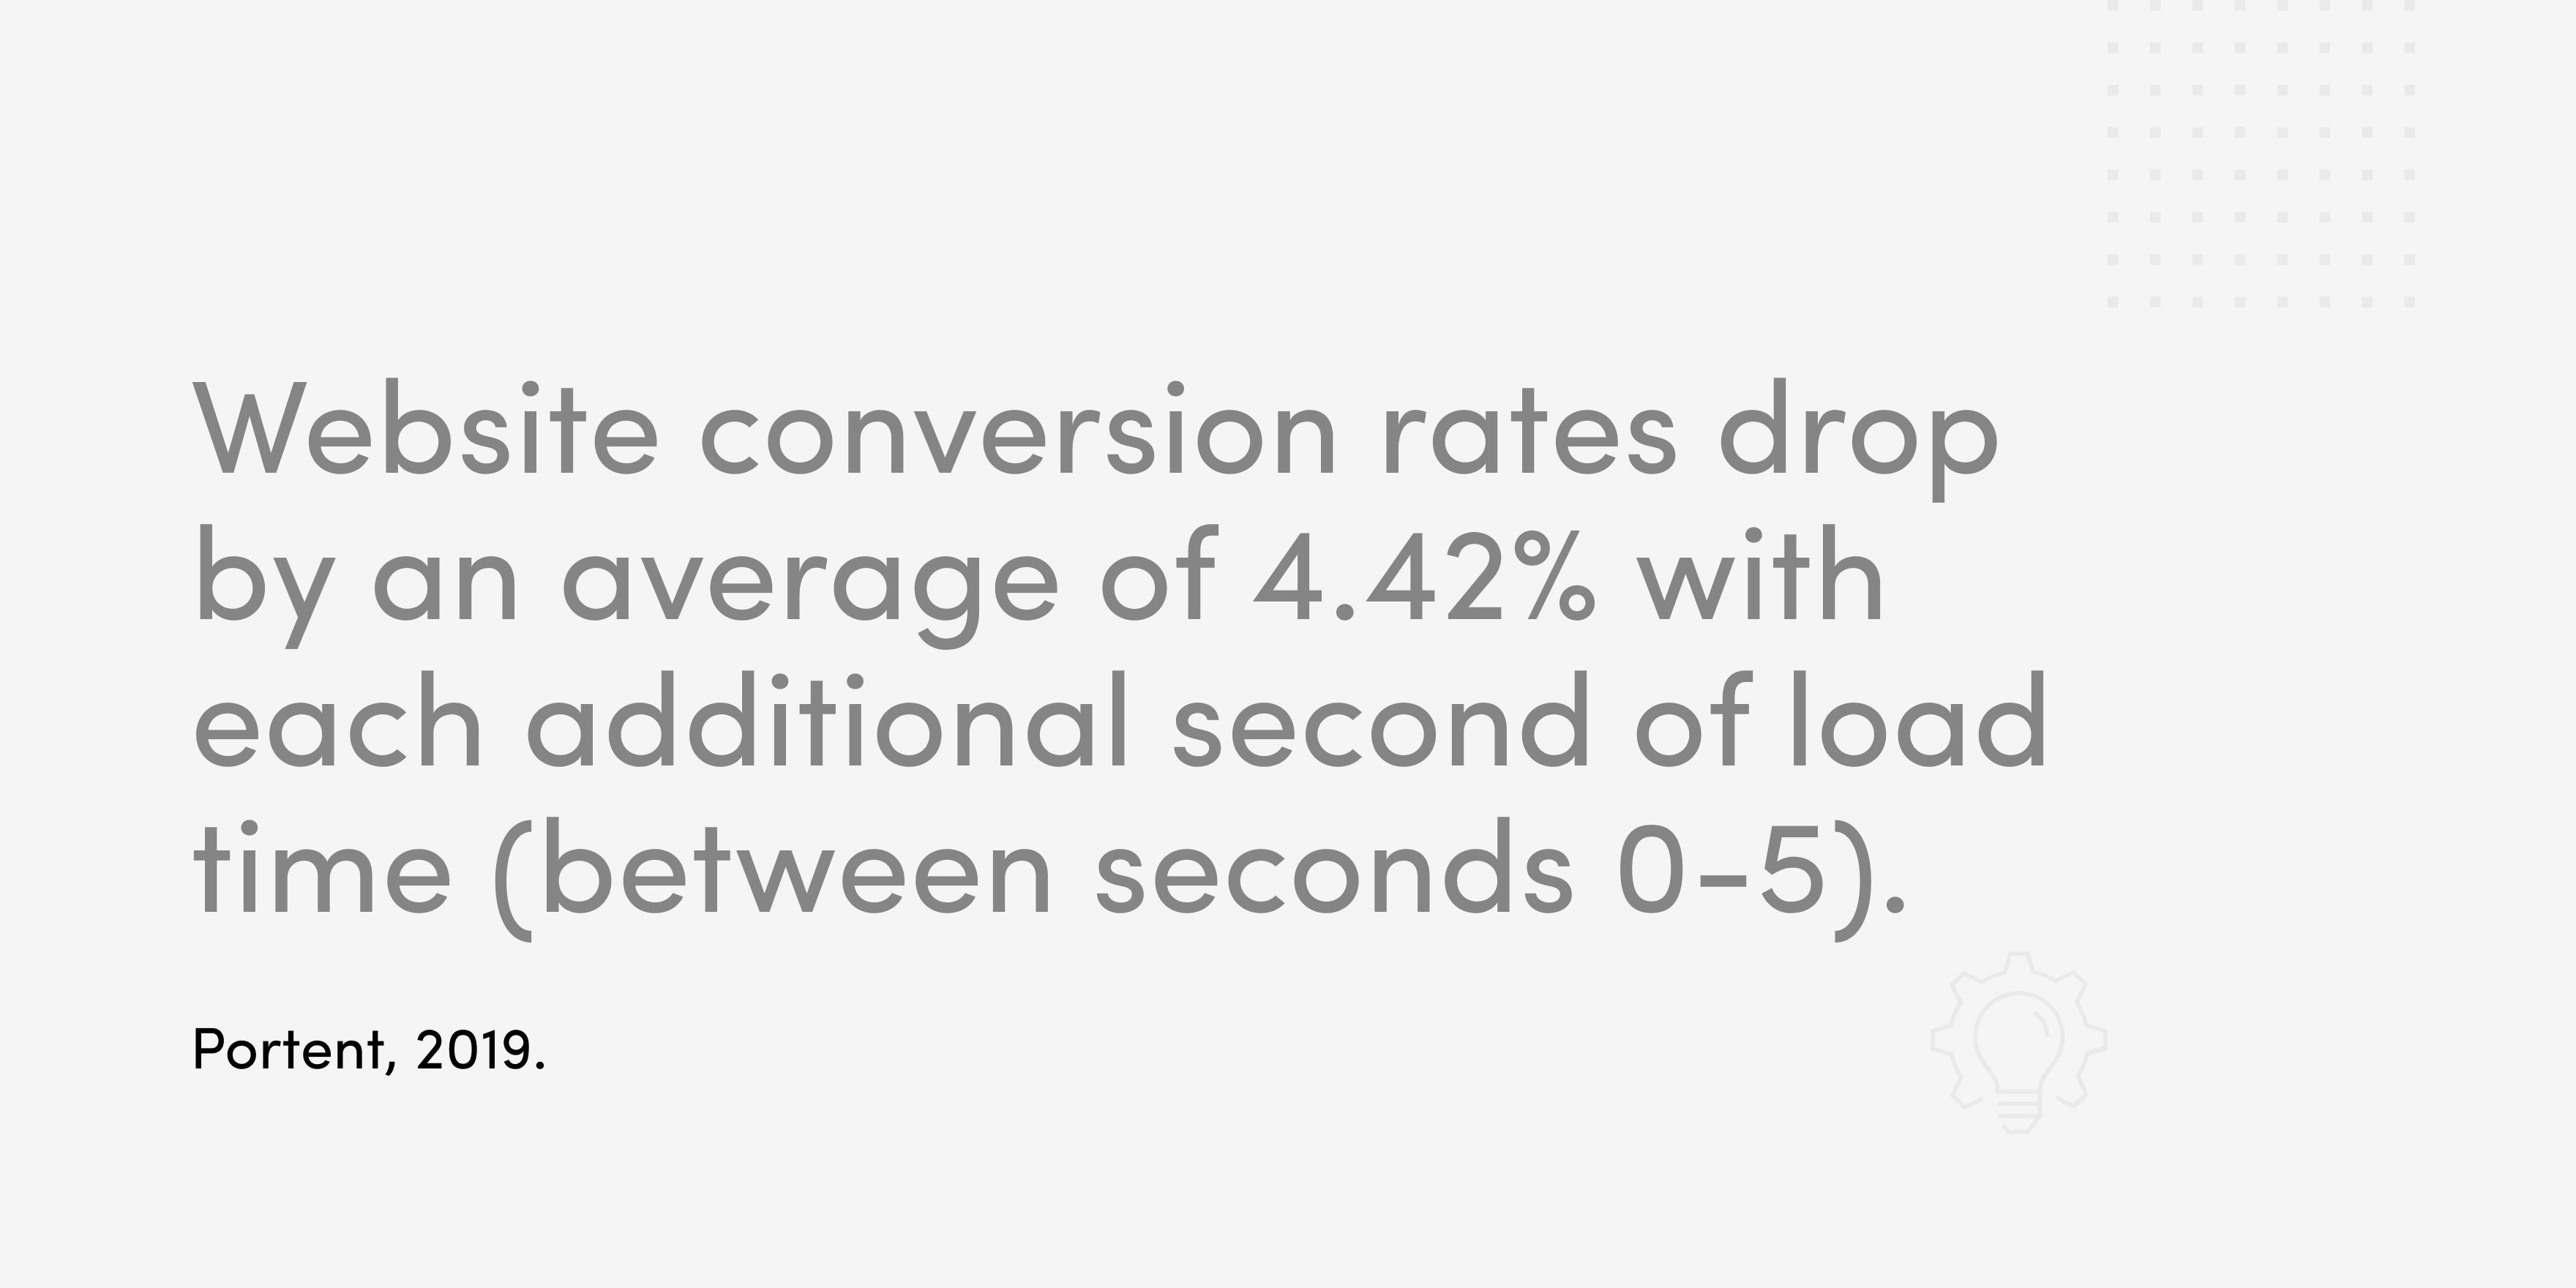 A minimalistic infographic stating 'Website conversion rates drop by an average of 4.42% with each additional second of load time (between seconds 0-5).' At the bottom, the source is cited as 'Portent, 2019.' To the right, there's a lightbulb icon with a gear inside it.